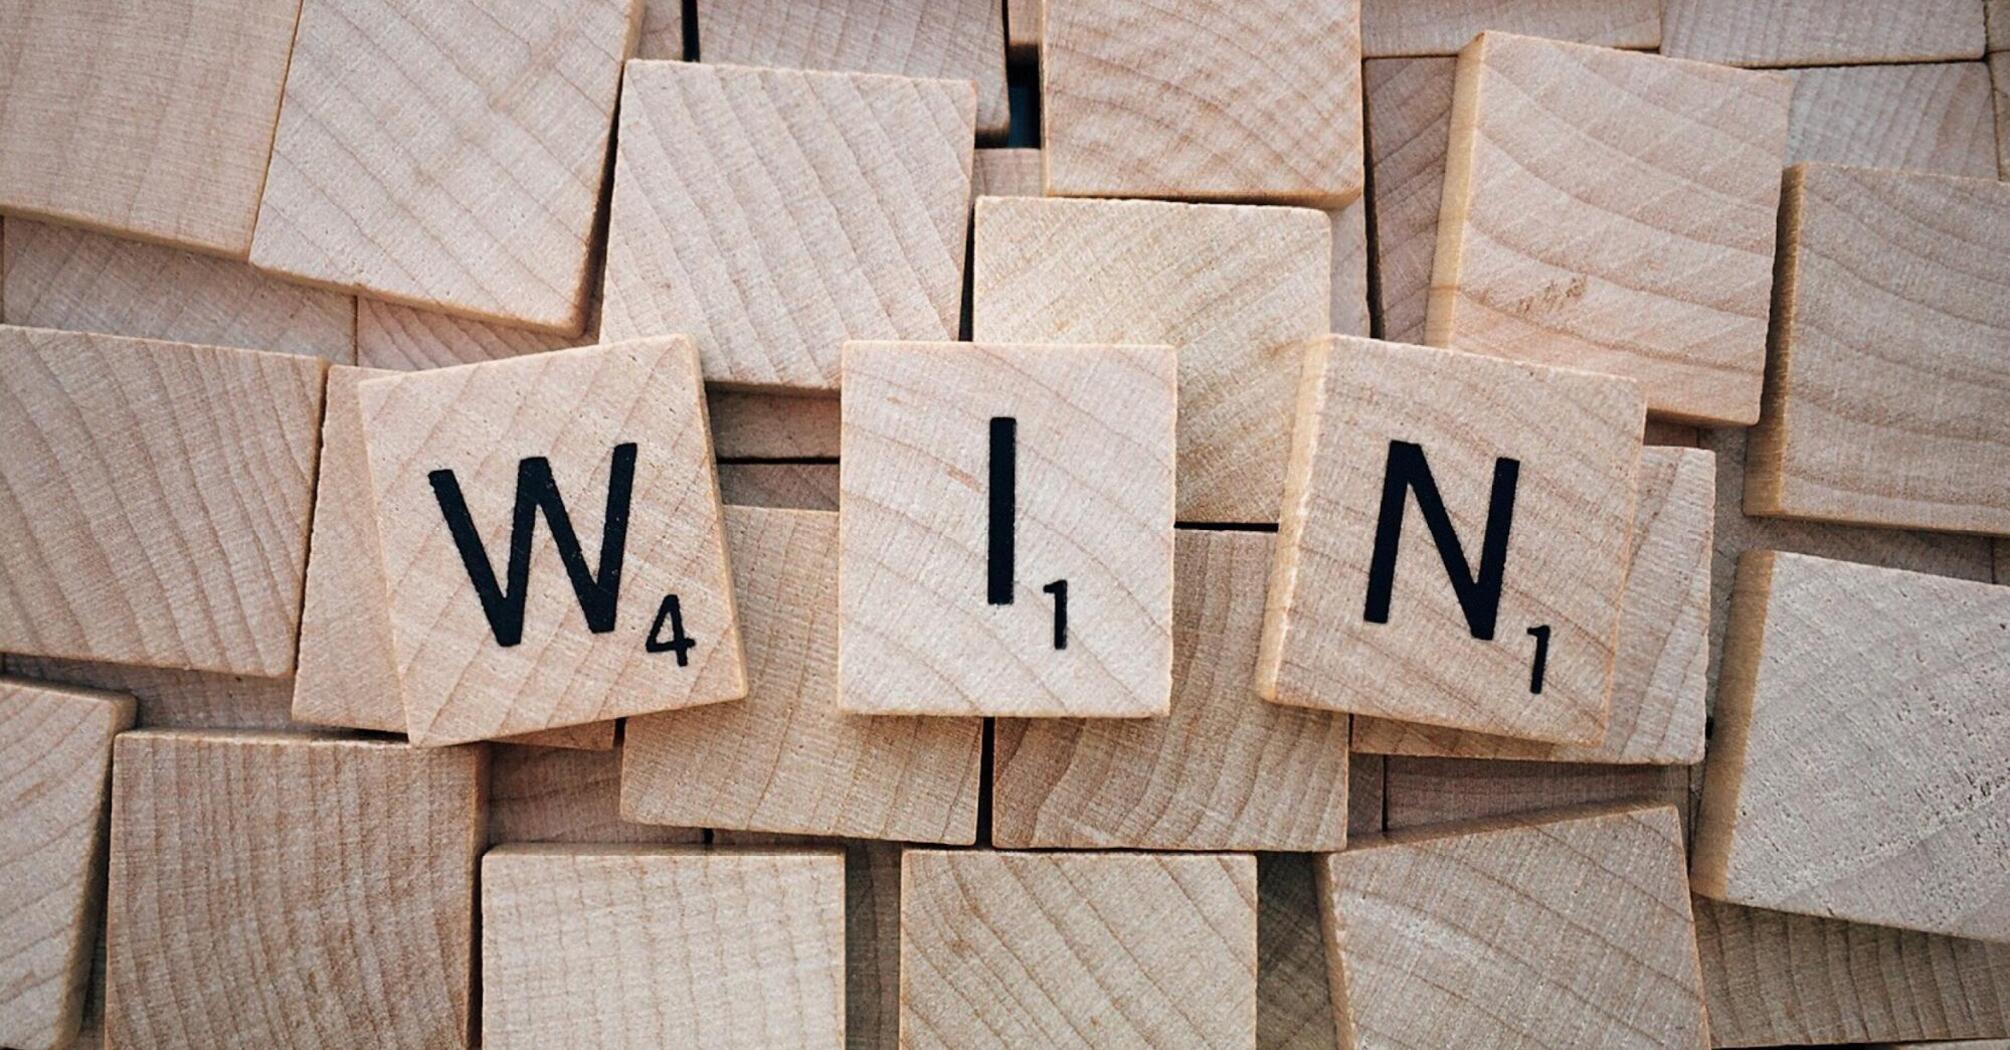 Word “Win” on wooden boards